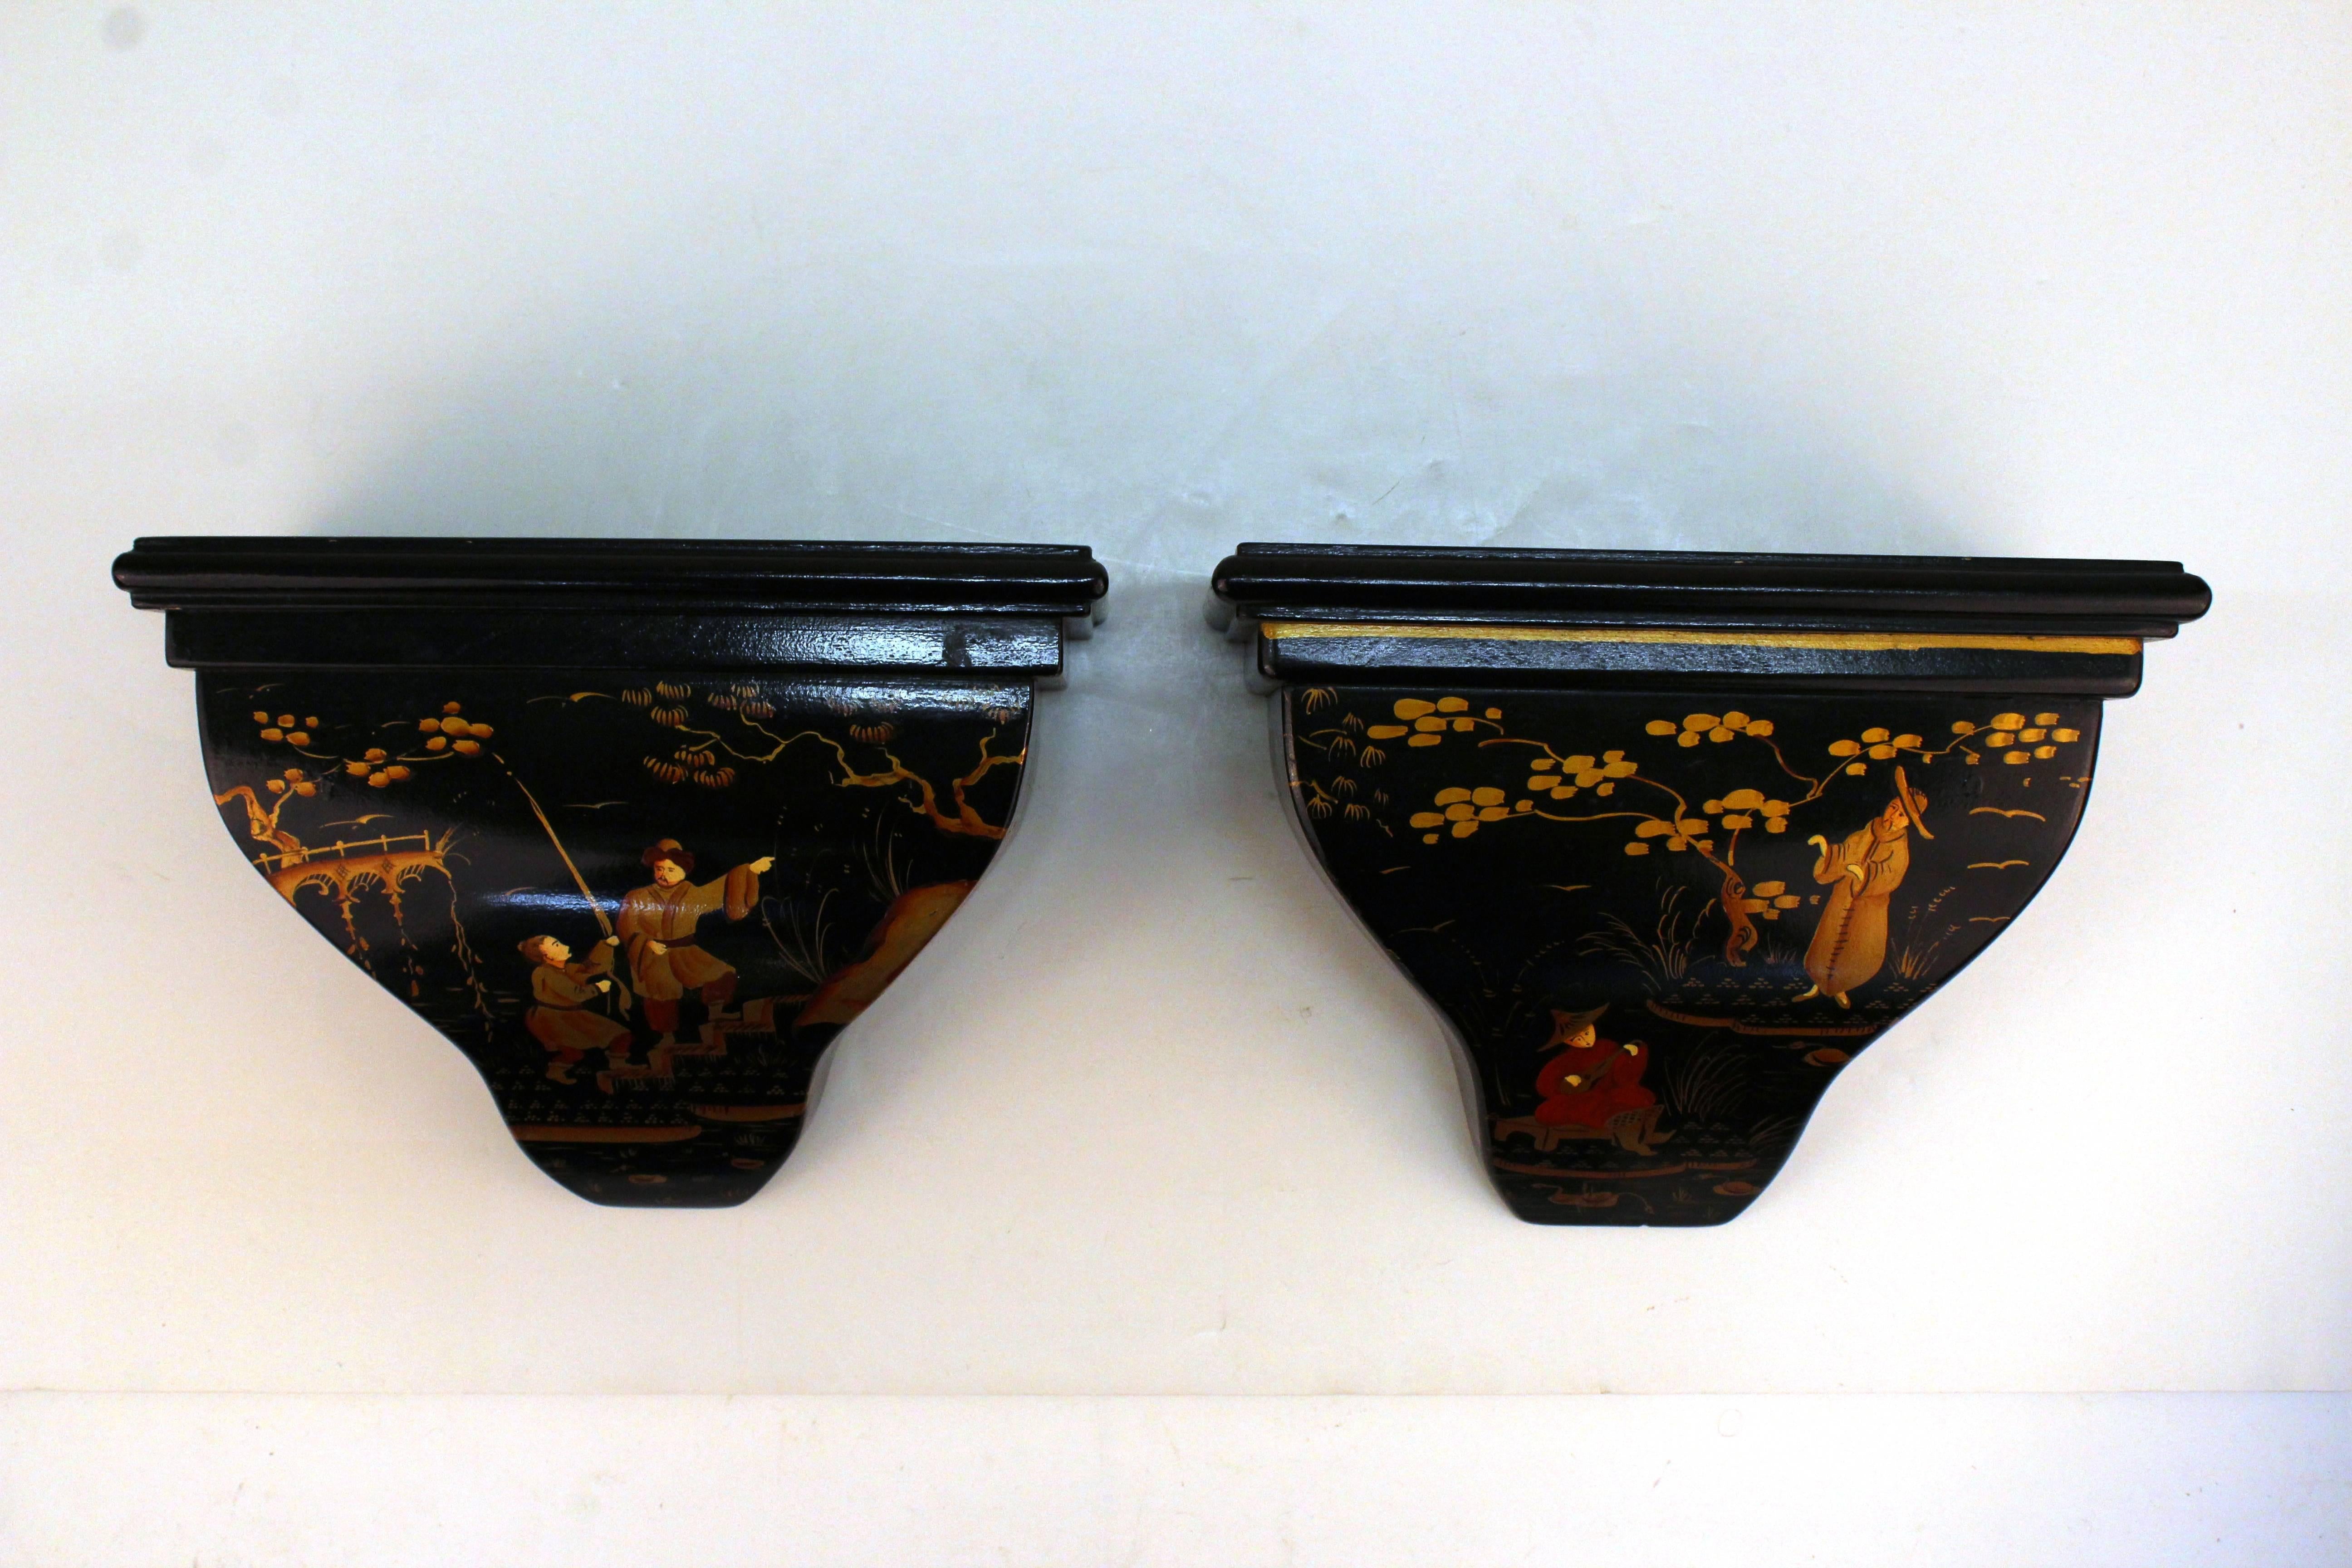 Pair of small wooden shelves by Don Andres. The shelves are black with hand-painted chinoiserie motifs in hues of rust and orange. Includes the original label on the back. Some wear to paint due to use; in good condition.